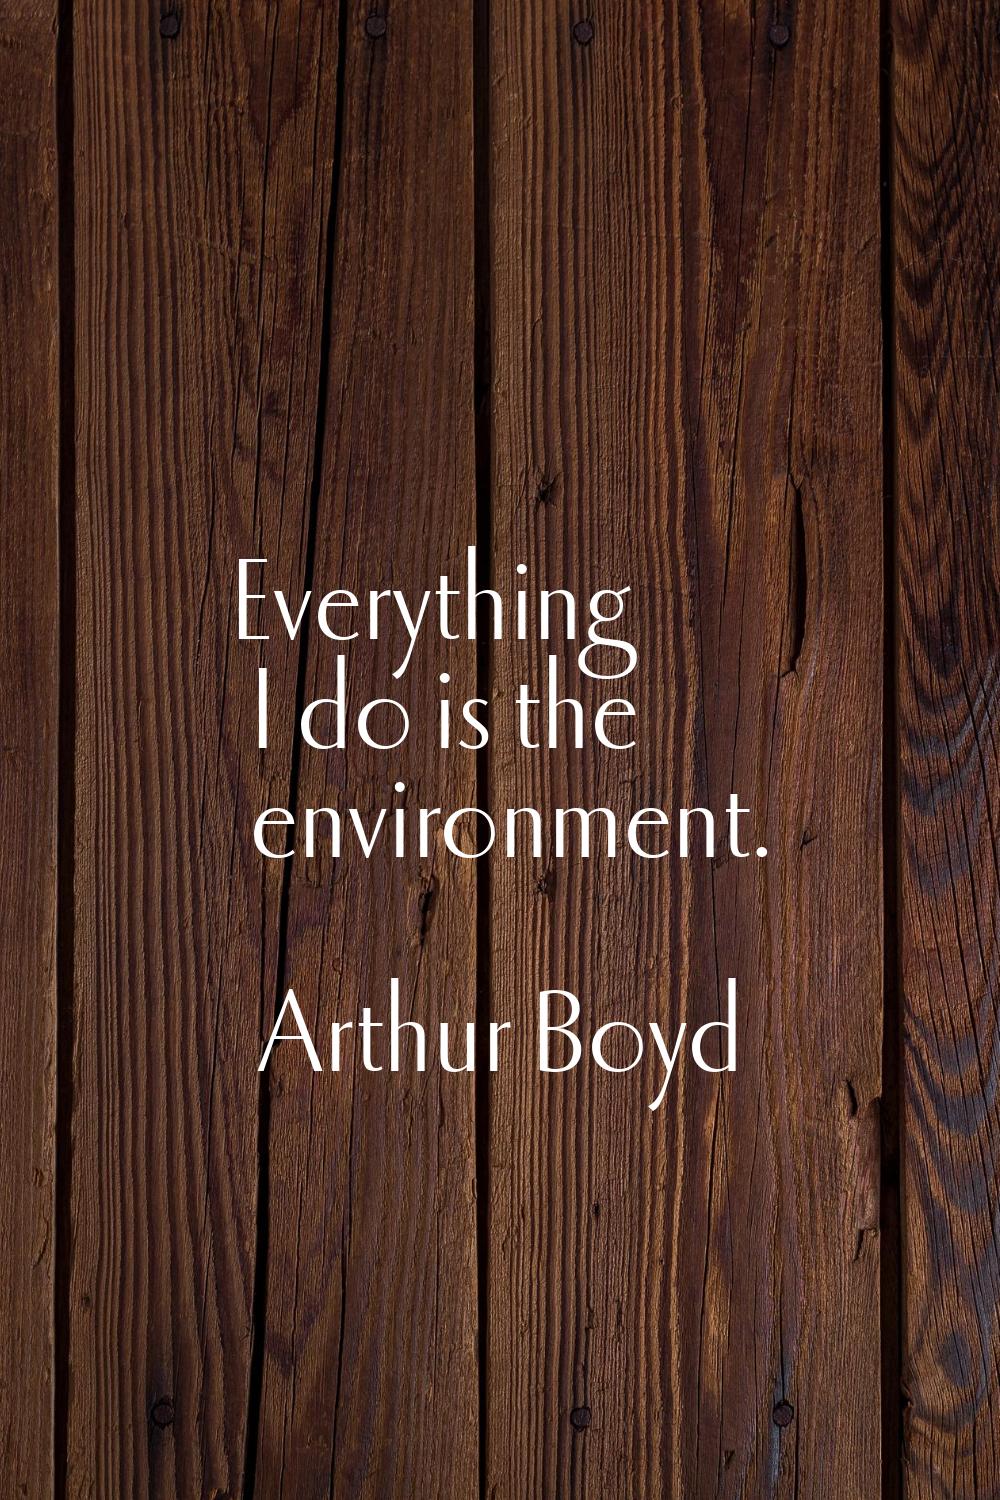 Everything I do is the environment.